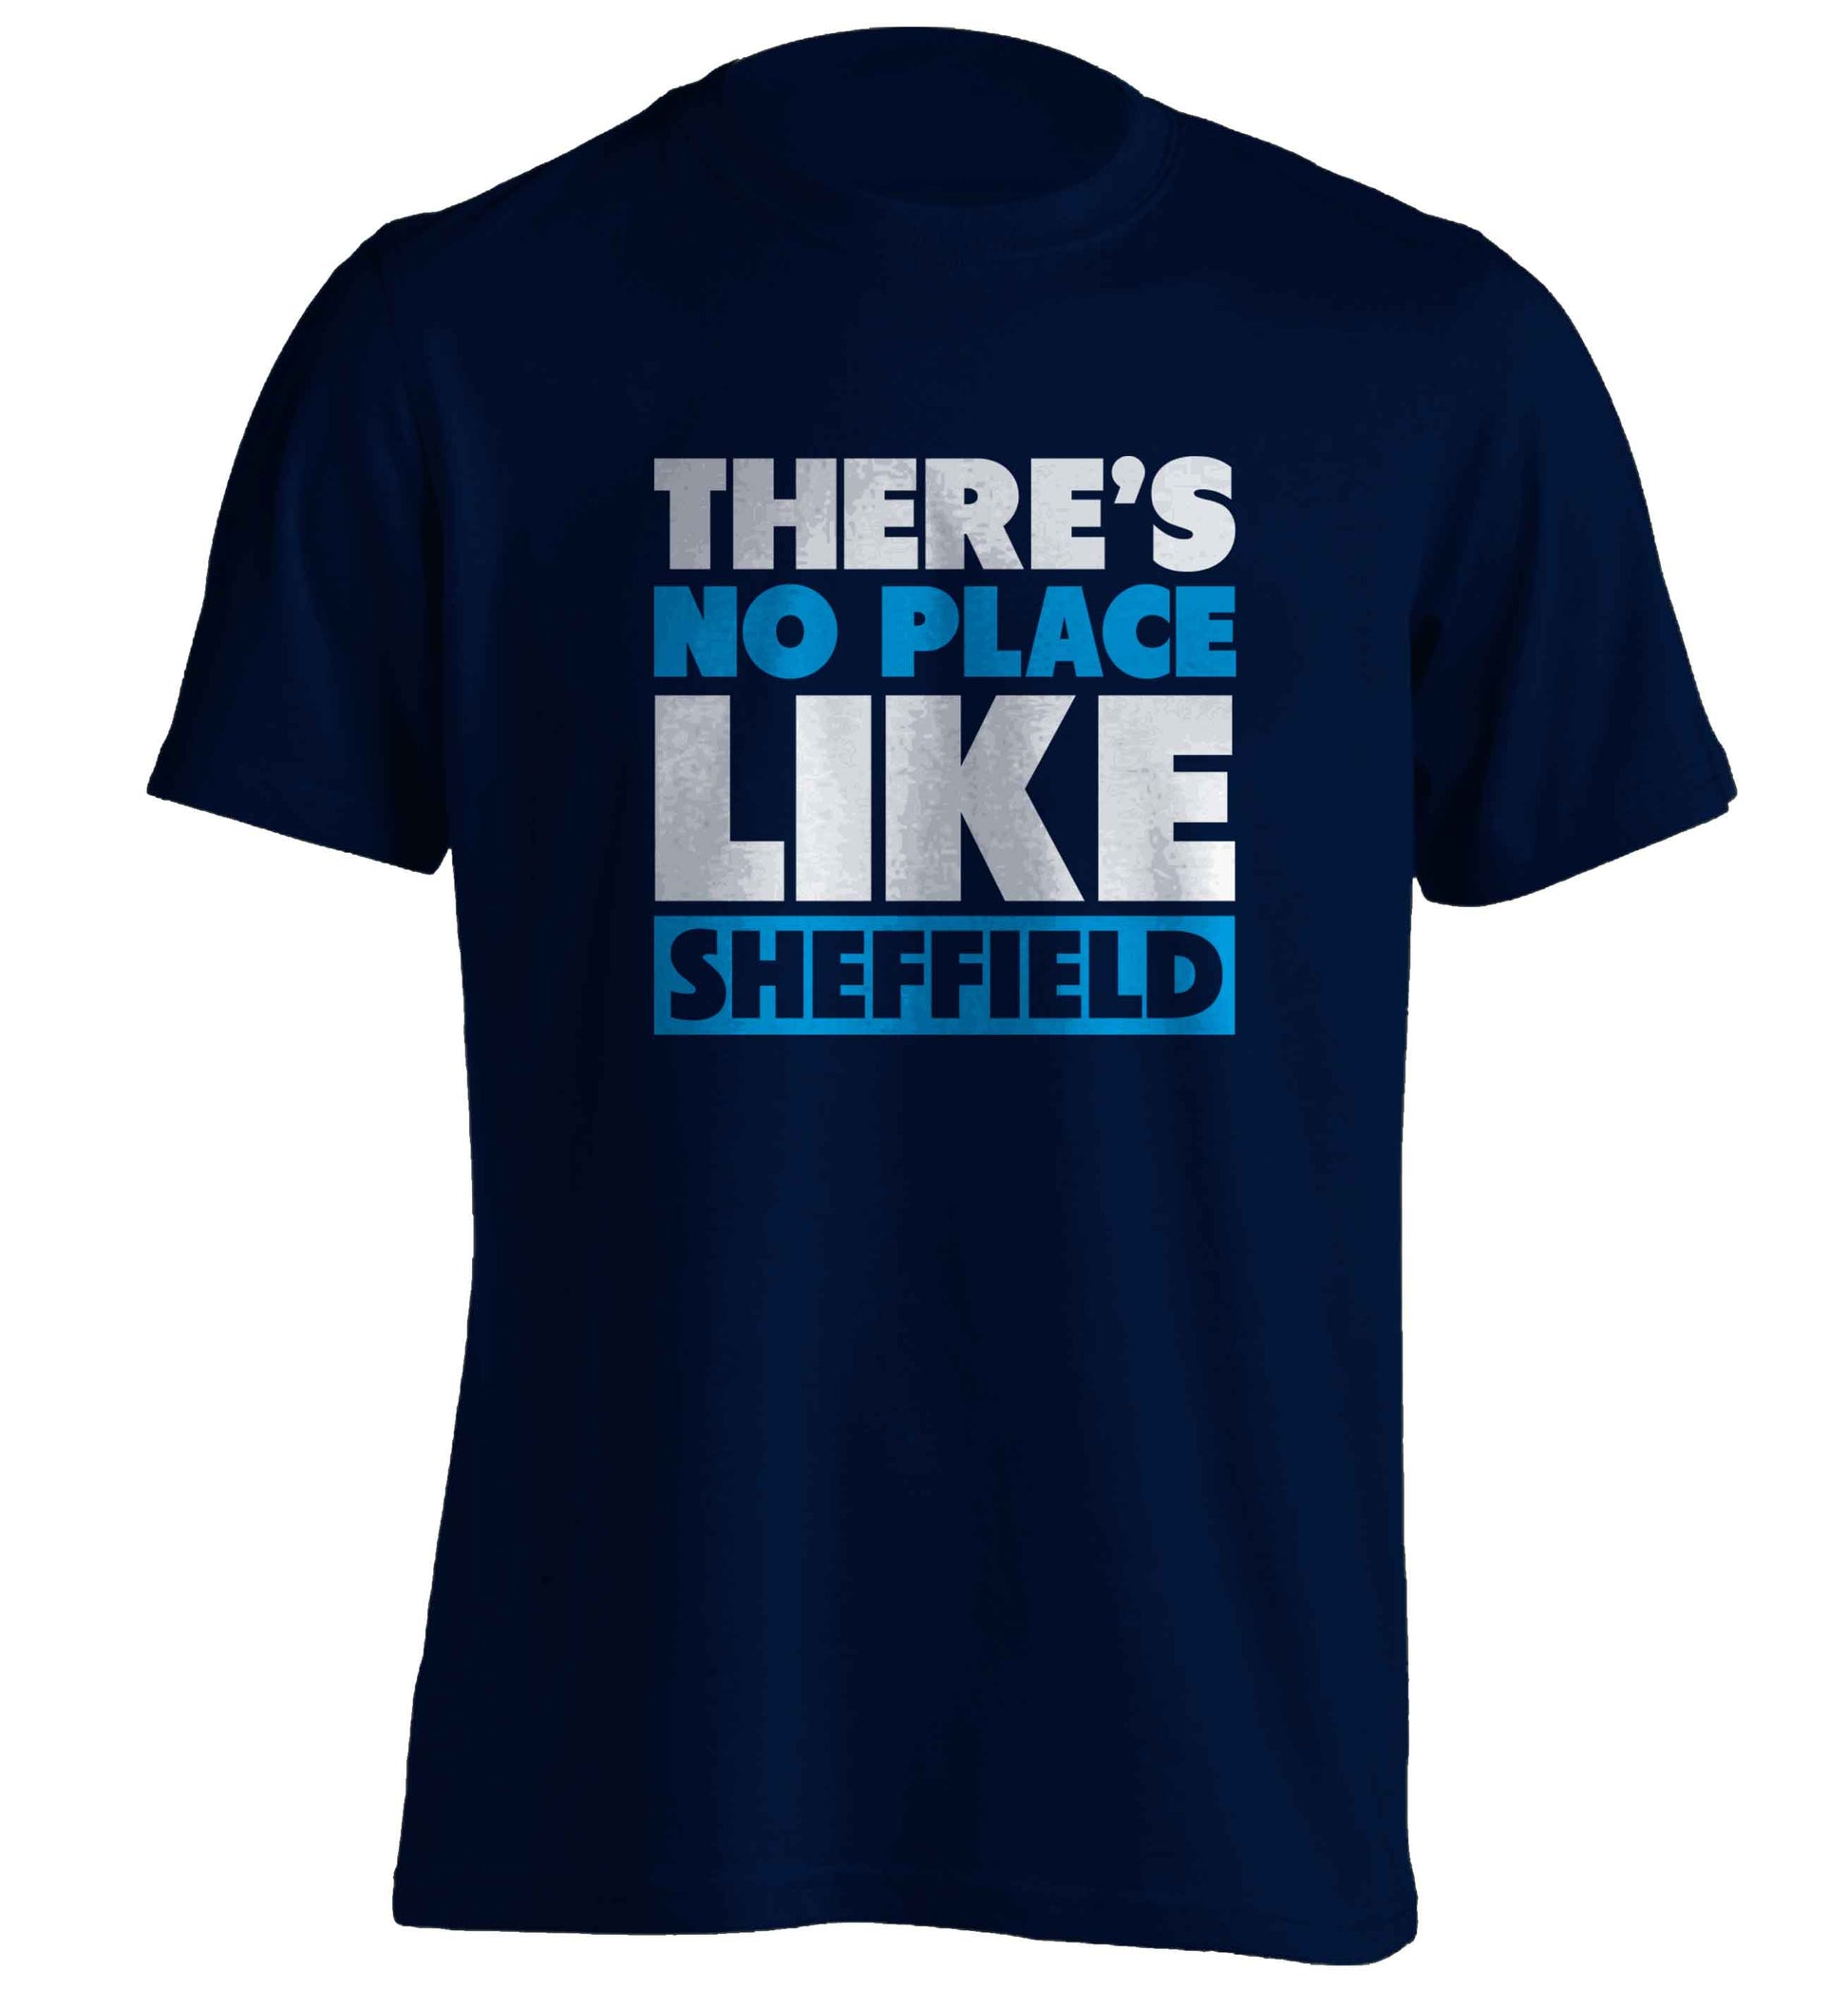 There's no place like Sheffield adults unisex navy Tshirt 2XL